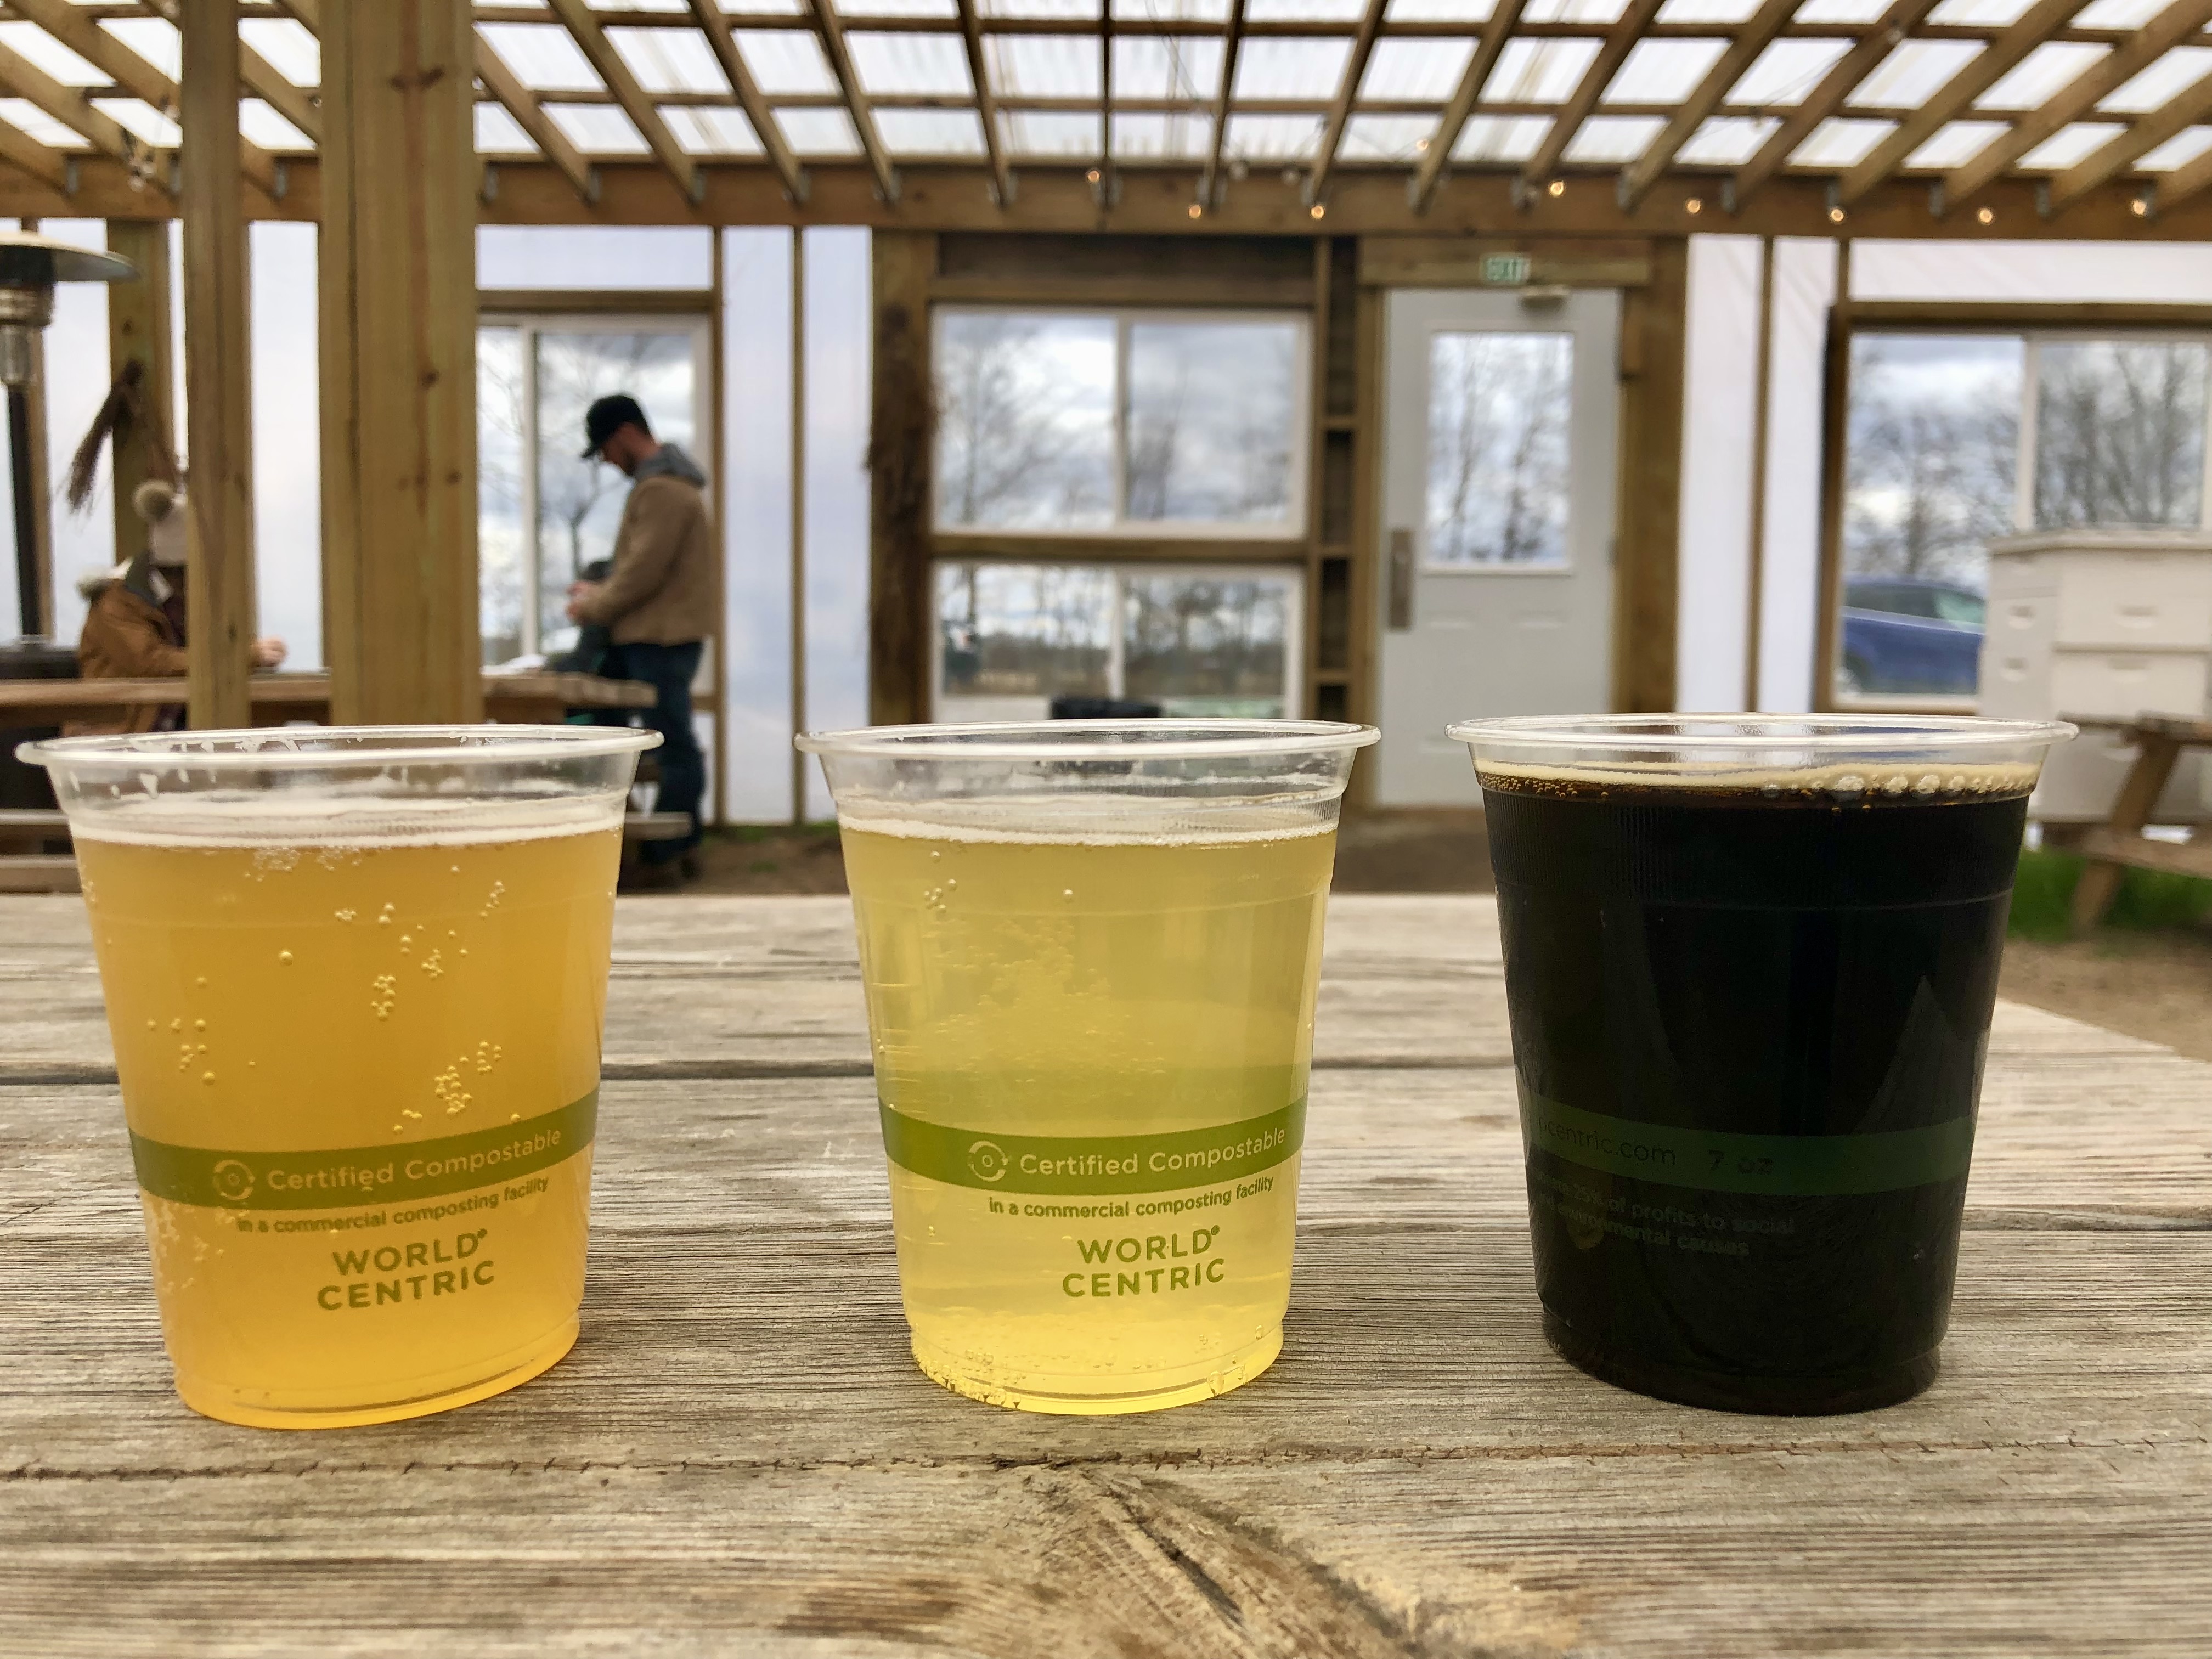 Three beers served in clear plastic cups are on a wooden picnic table. On the left is a light, yellow-amber colored beer. In the center is a very light yellow beer. On the right is a dark brown beer. Photo by Yobu (Arthur) Zou.